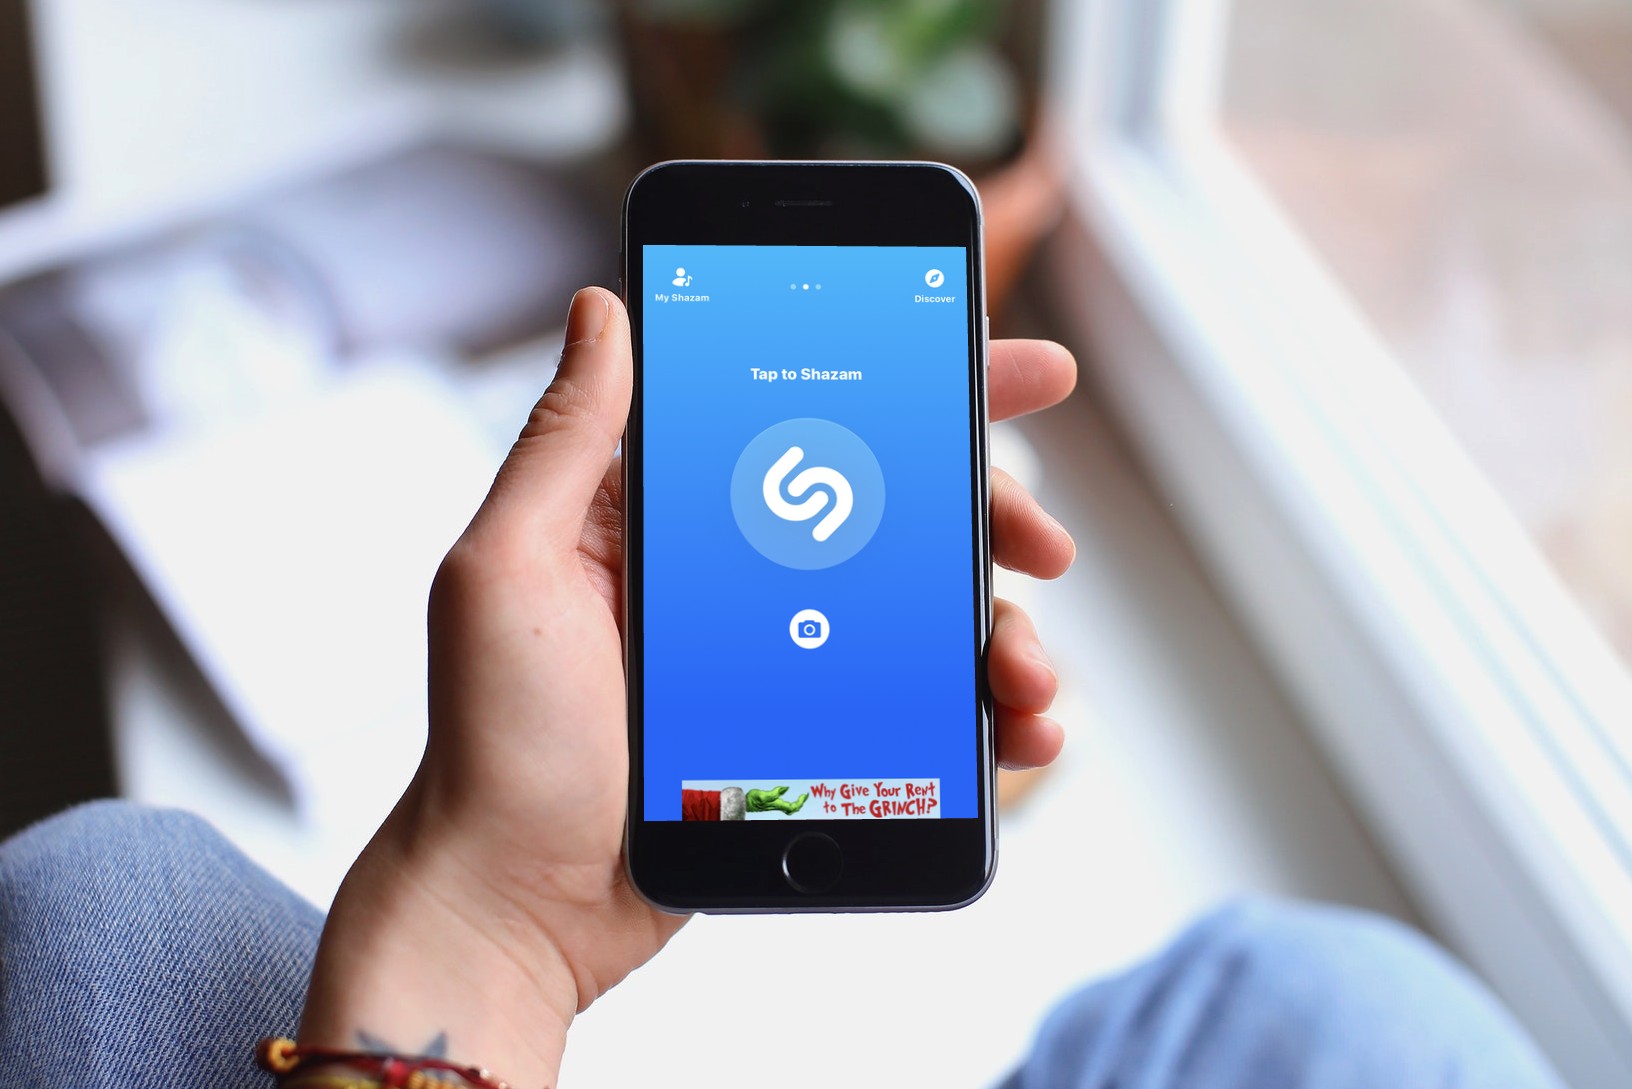 Apple Music Offers Up To 5 Free Months Through Shazam